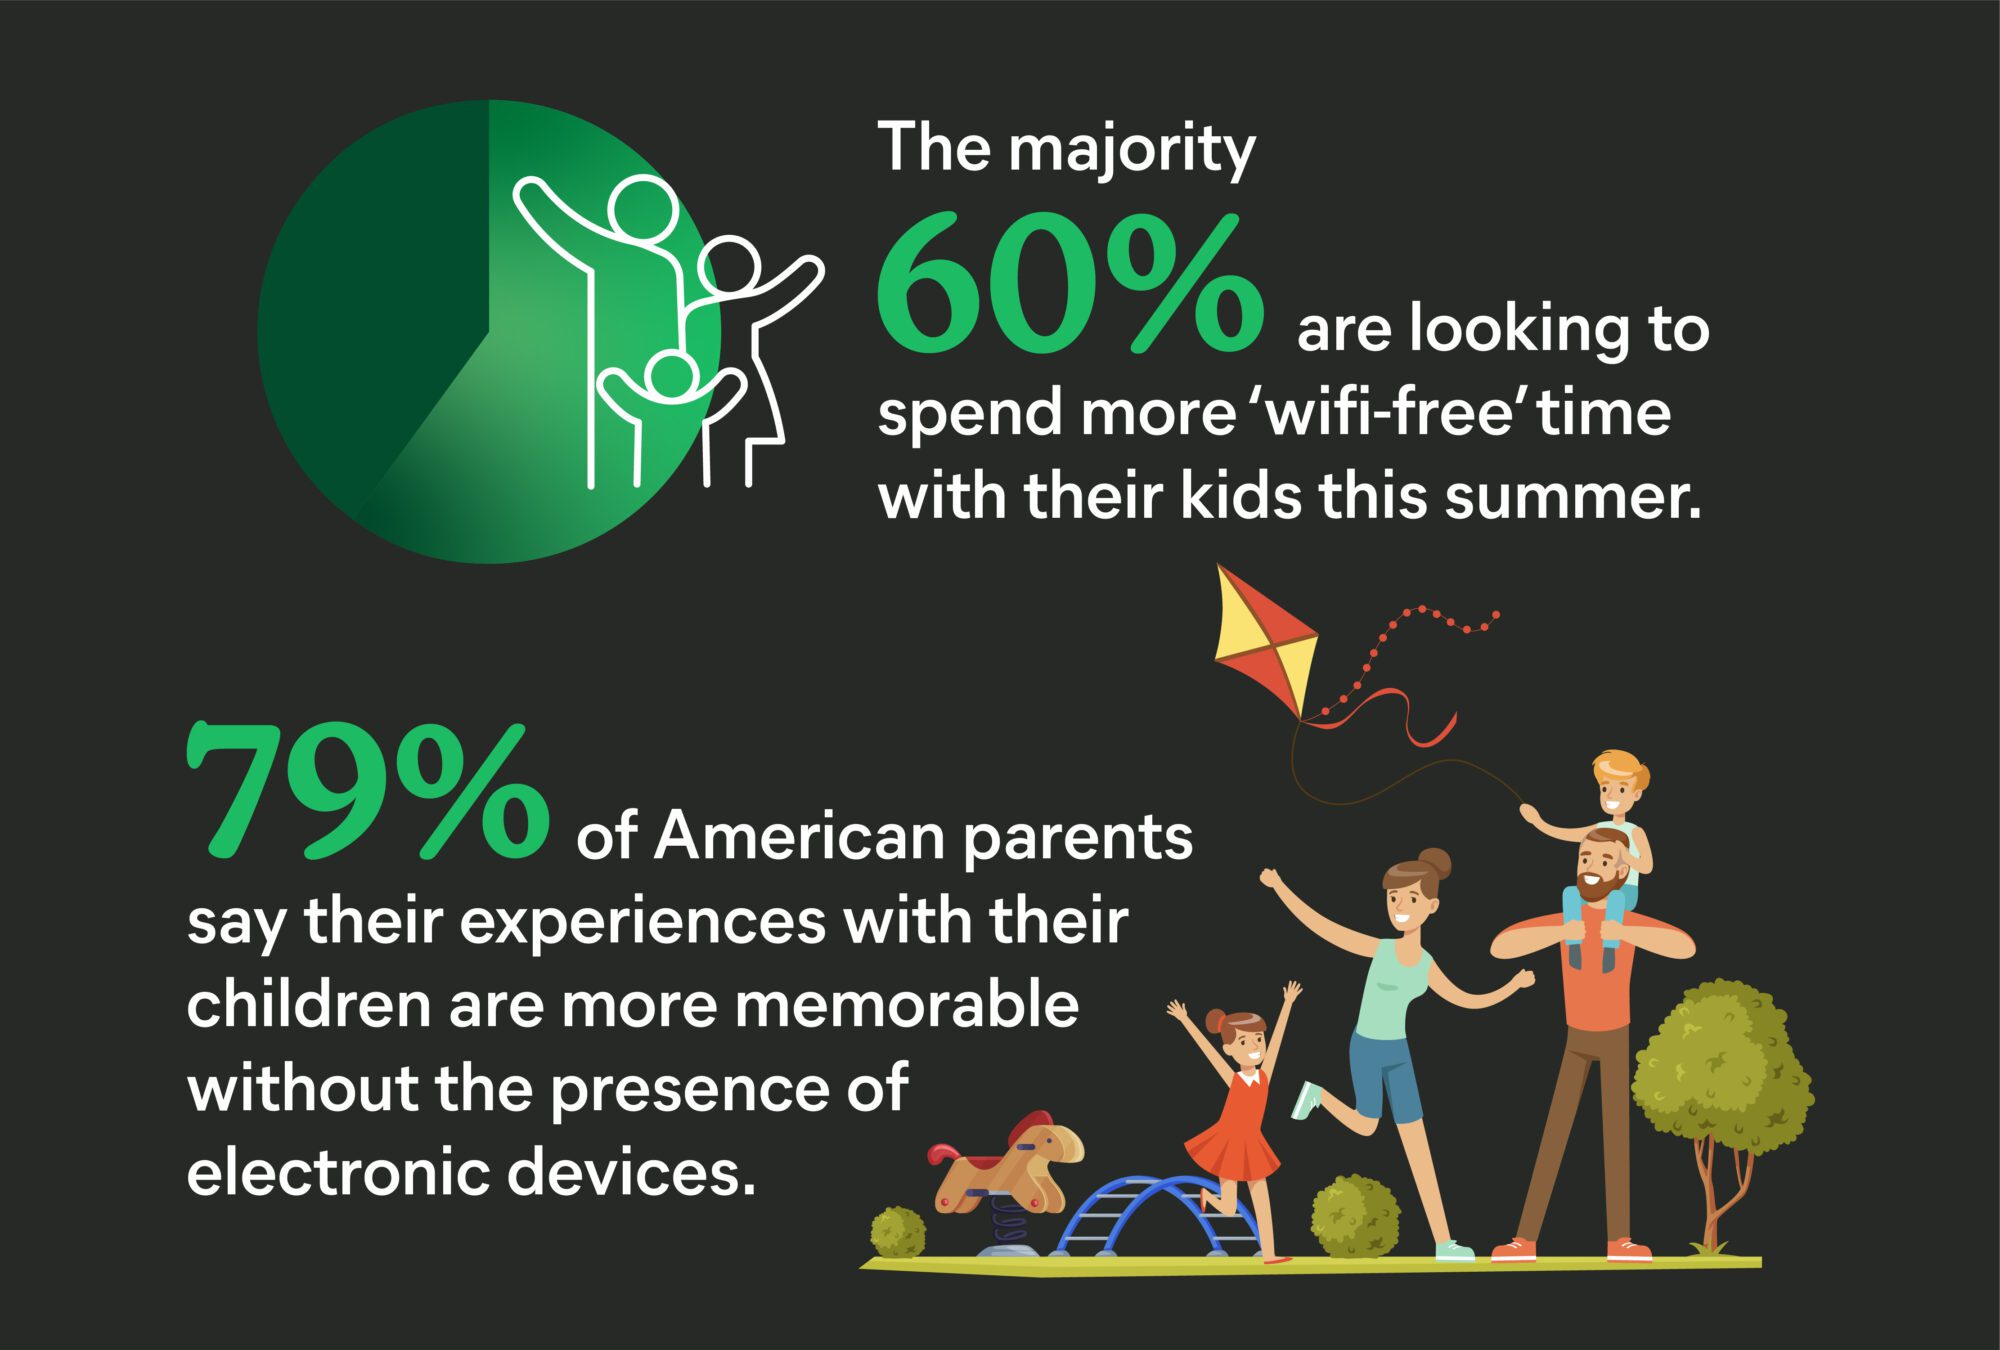 American parents are seeking ways to escape technology and reconnect with their kids this summer.